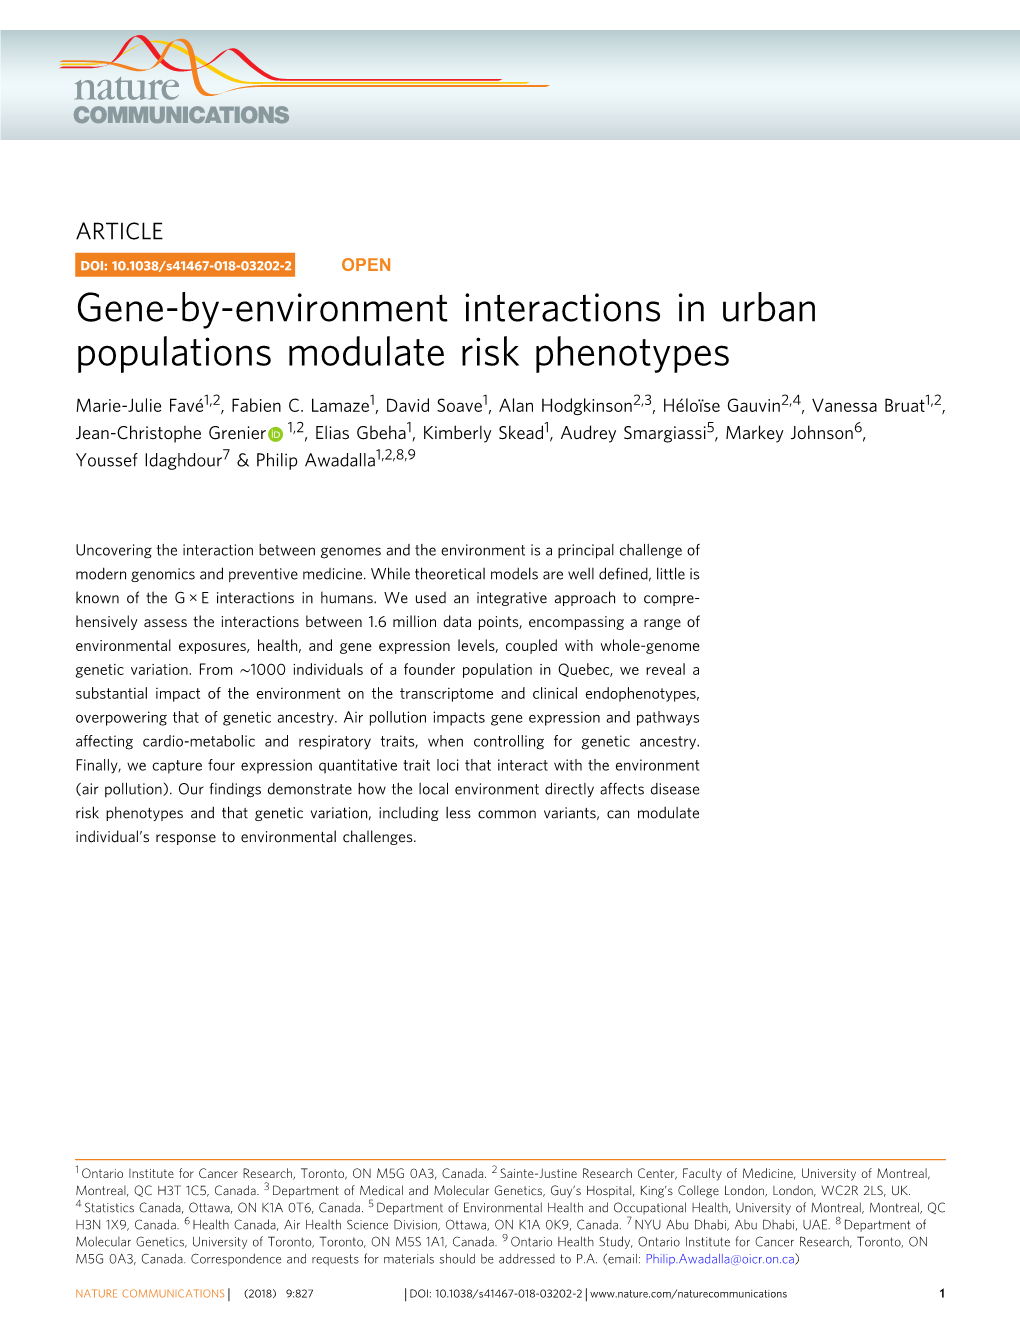 Gene-By-Environment Interactions in Urban Populations Modulate Risk Phenotypes